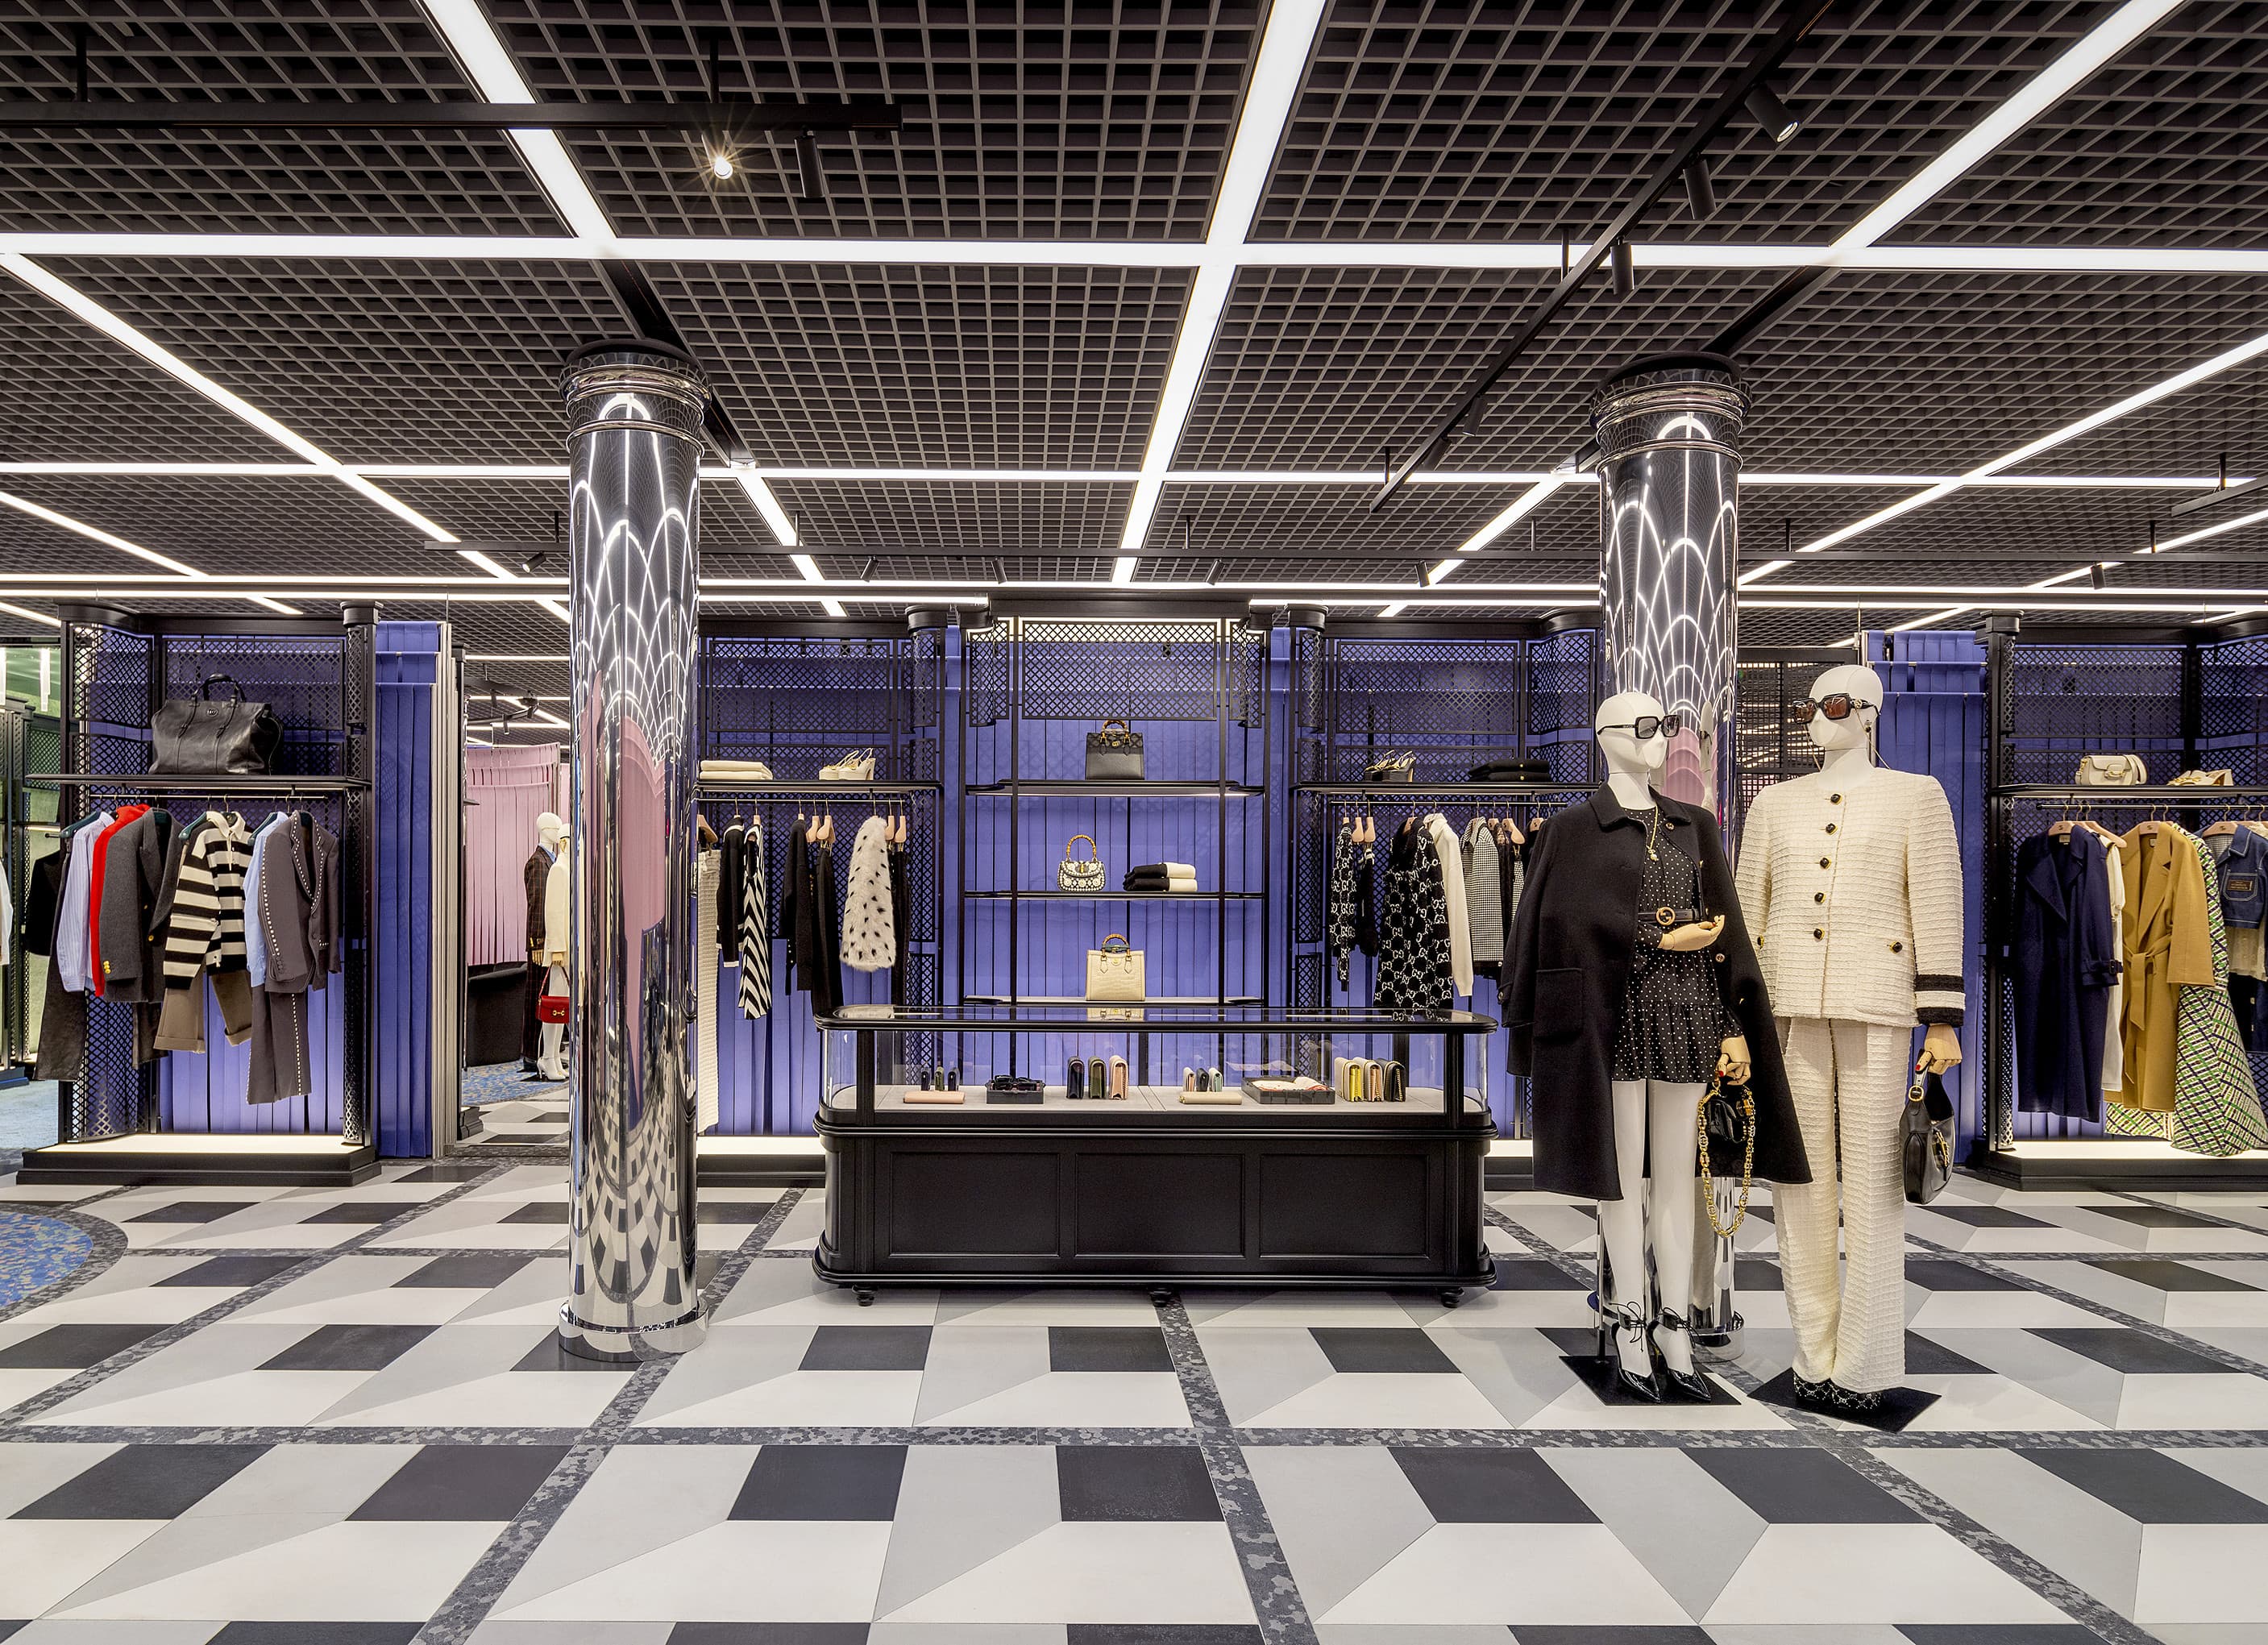 Retail  Inside the new Gucci store in SoHo, New York [PHOTOS